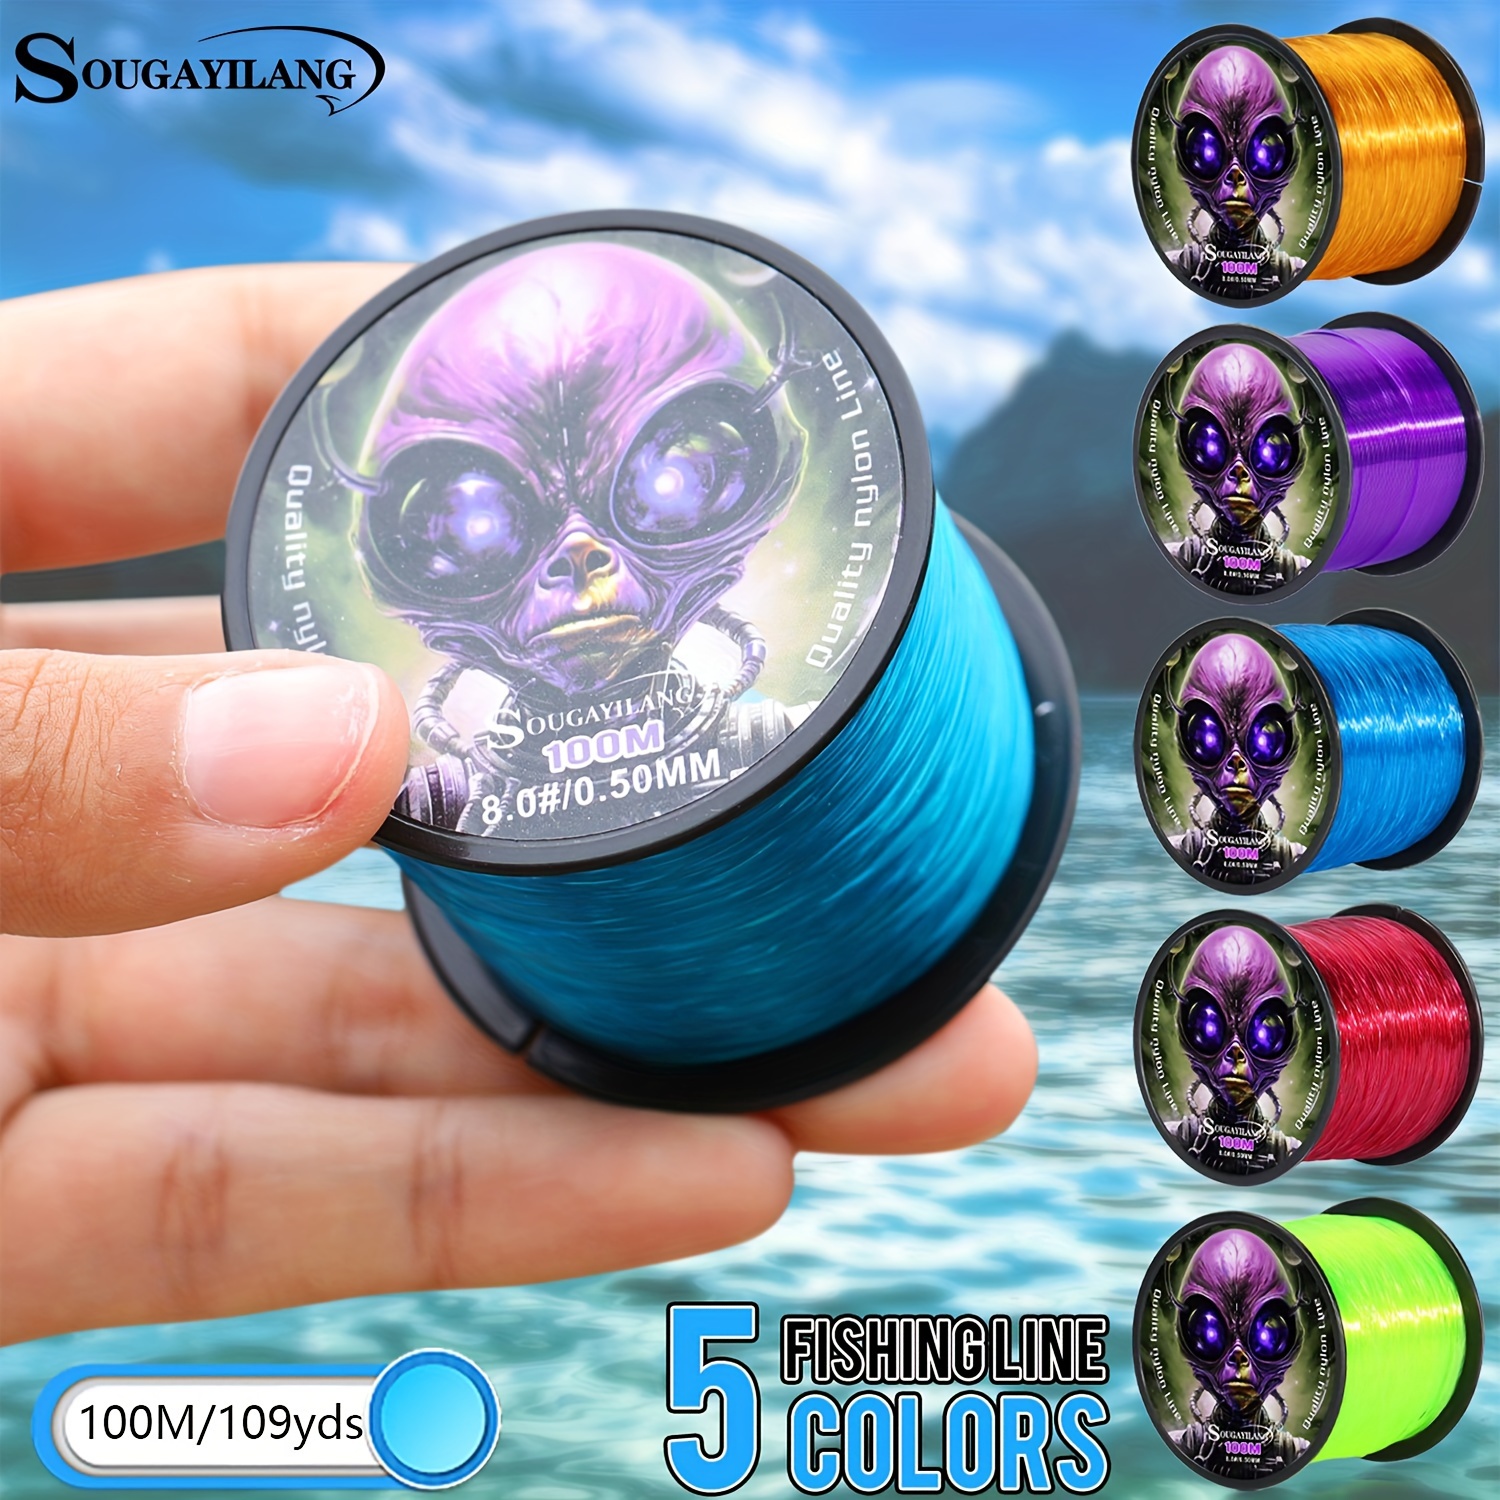 

Sougayilang 100m/109yds Wear-resistant Nylon Line, Abrasion Resistance & High Strength, Outdoor Fishing Tackle